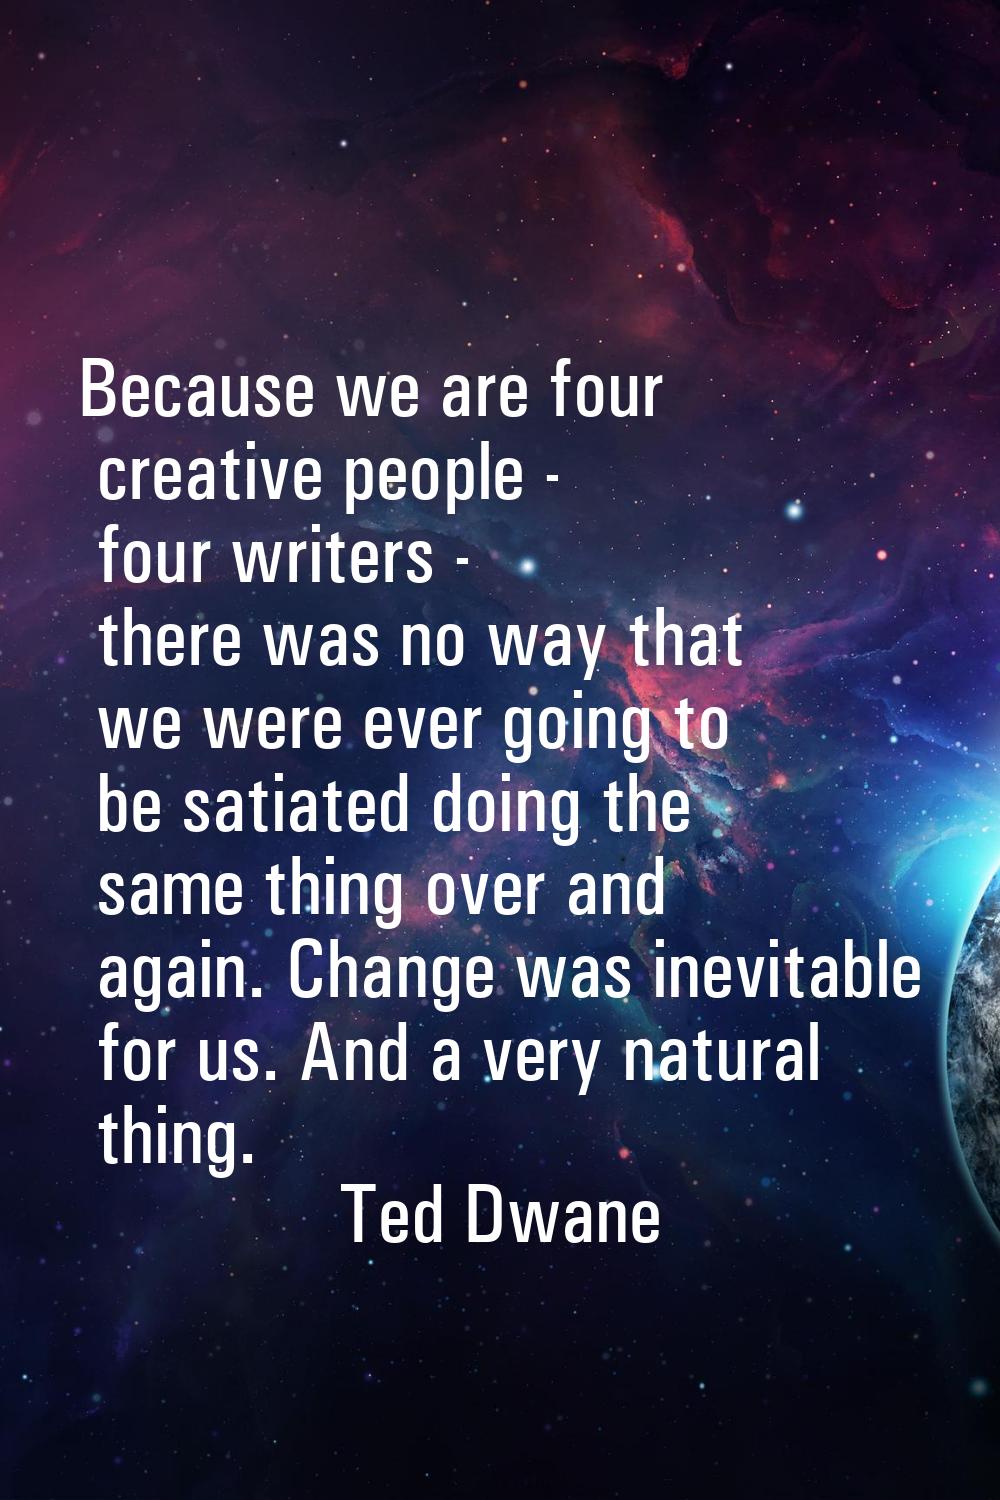 Because we are four creative people - four writers - there was no way that we were ever going to be